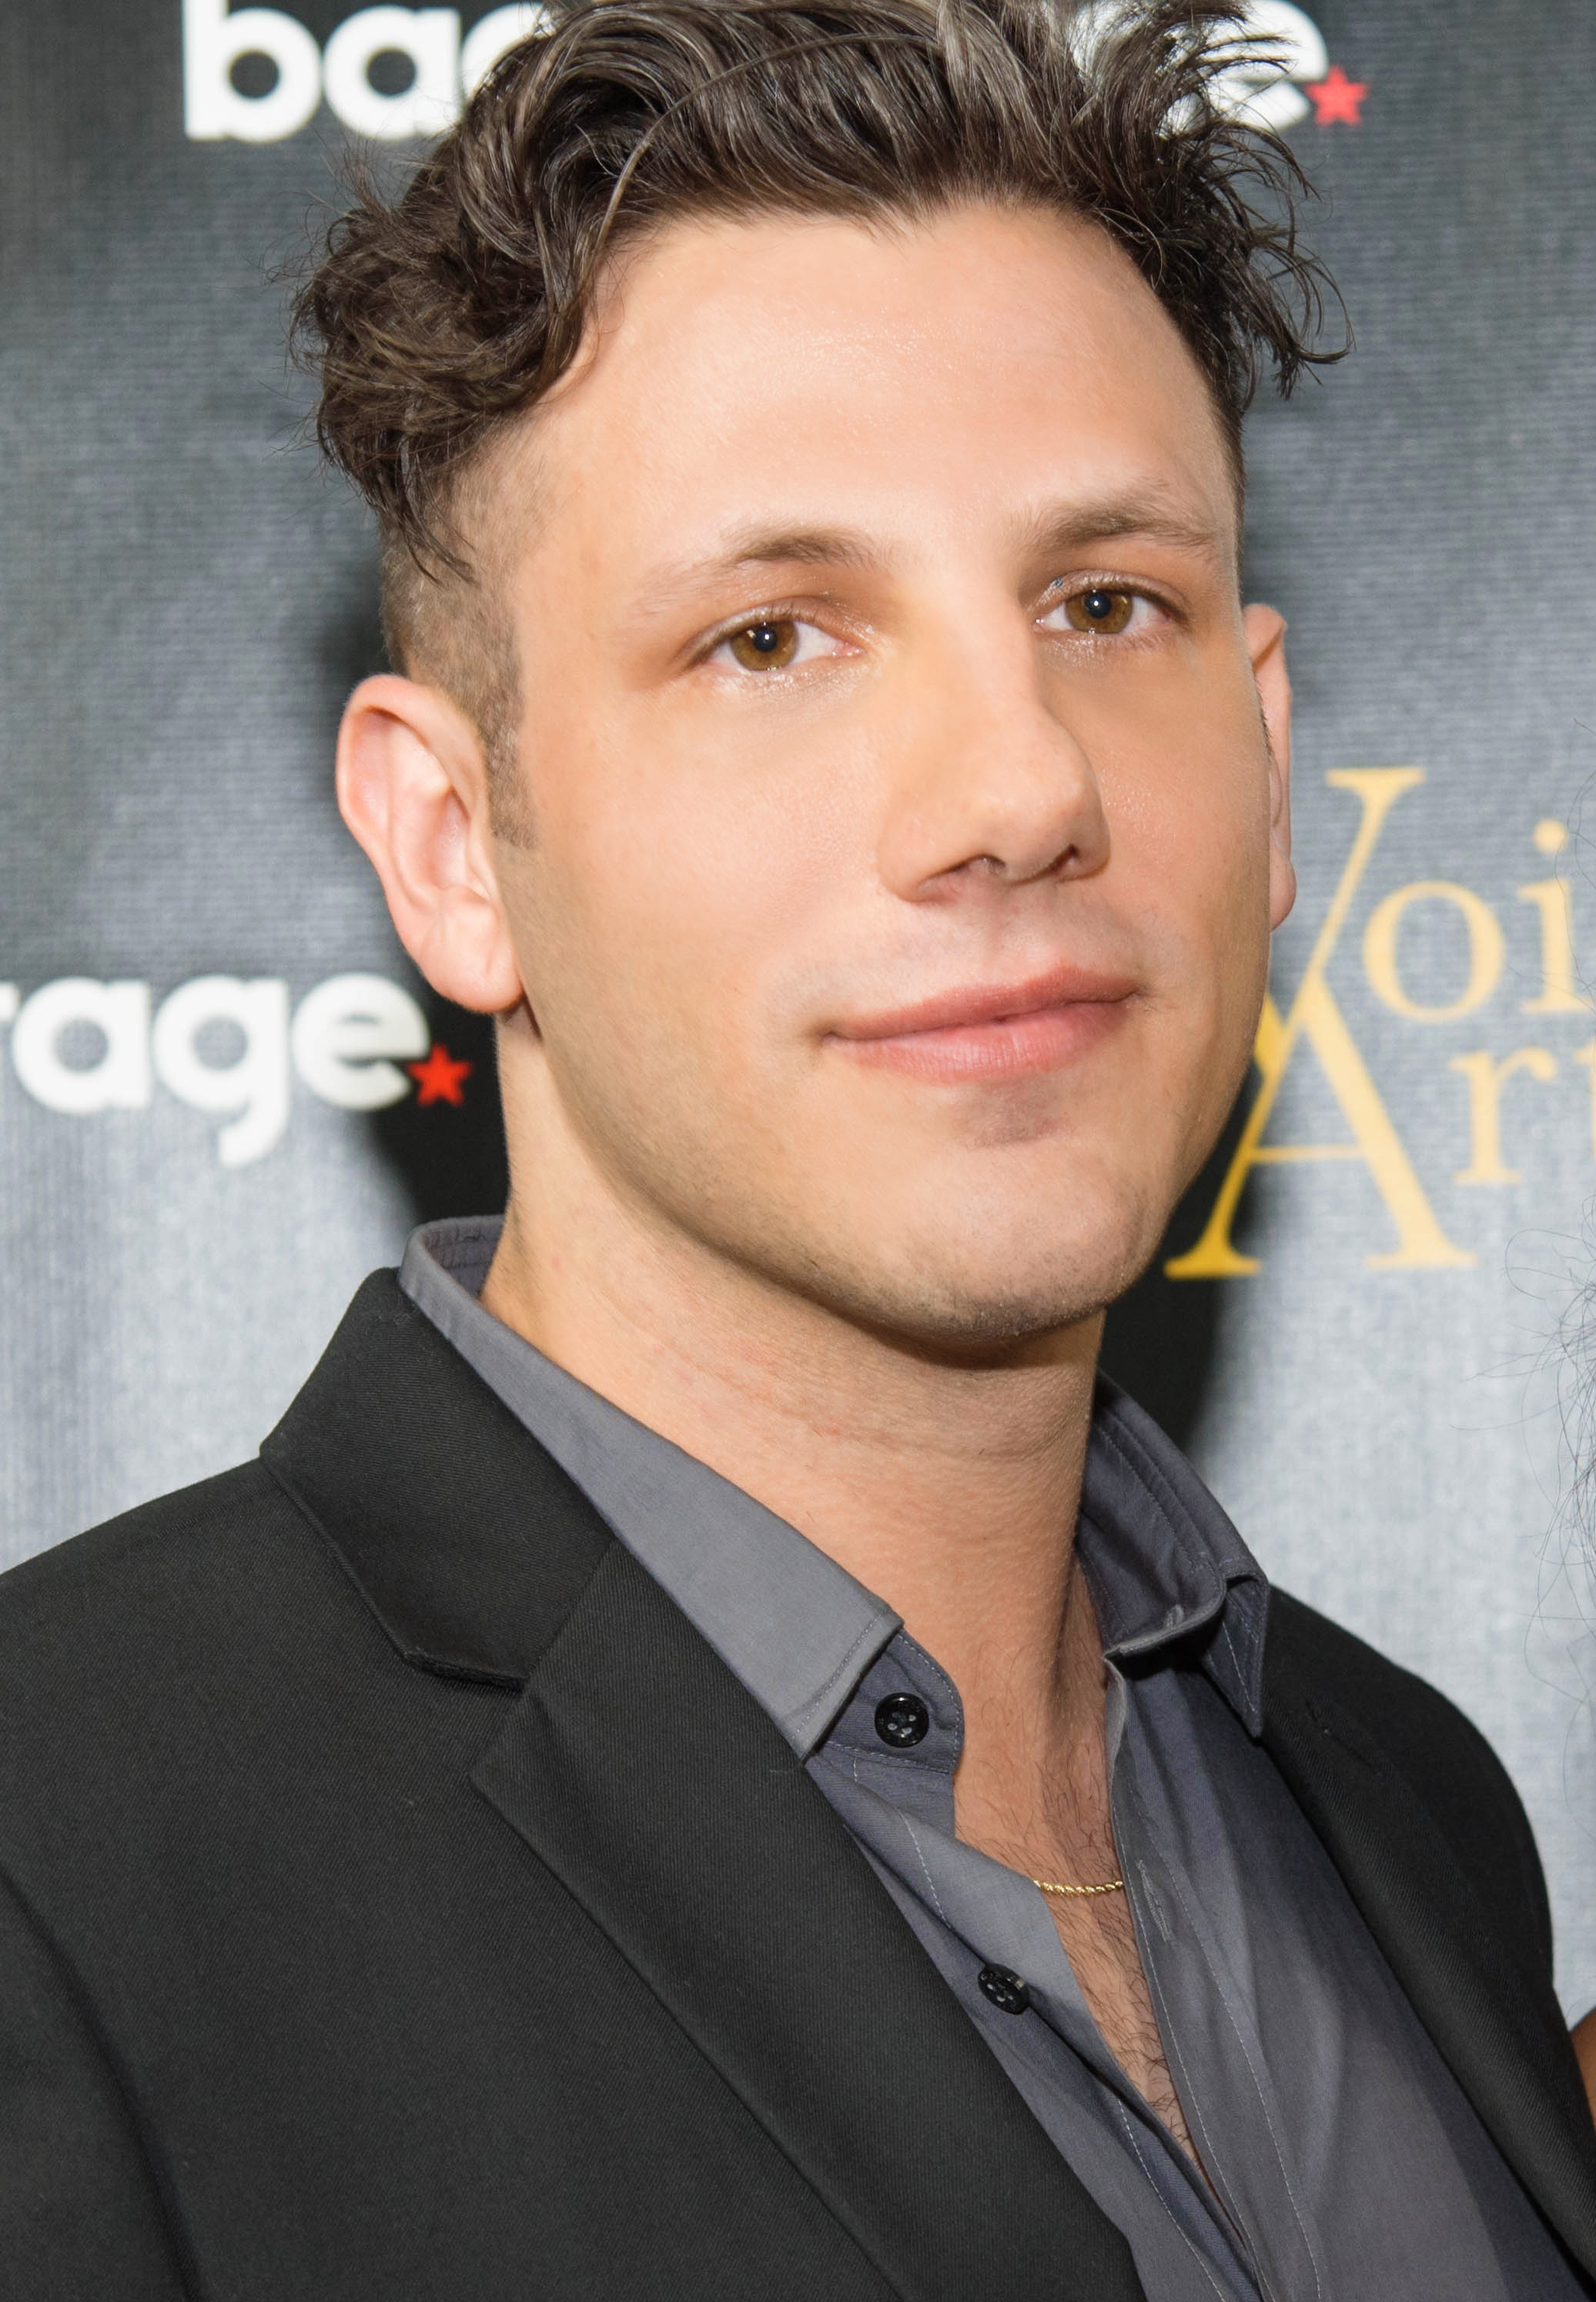 Maxx Hennard at the 2014 Voice Arts Awards at the Pacific Design Center, Los Angeles.